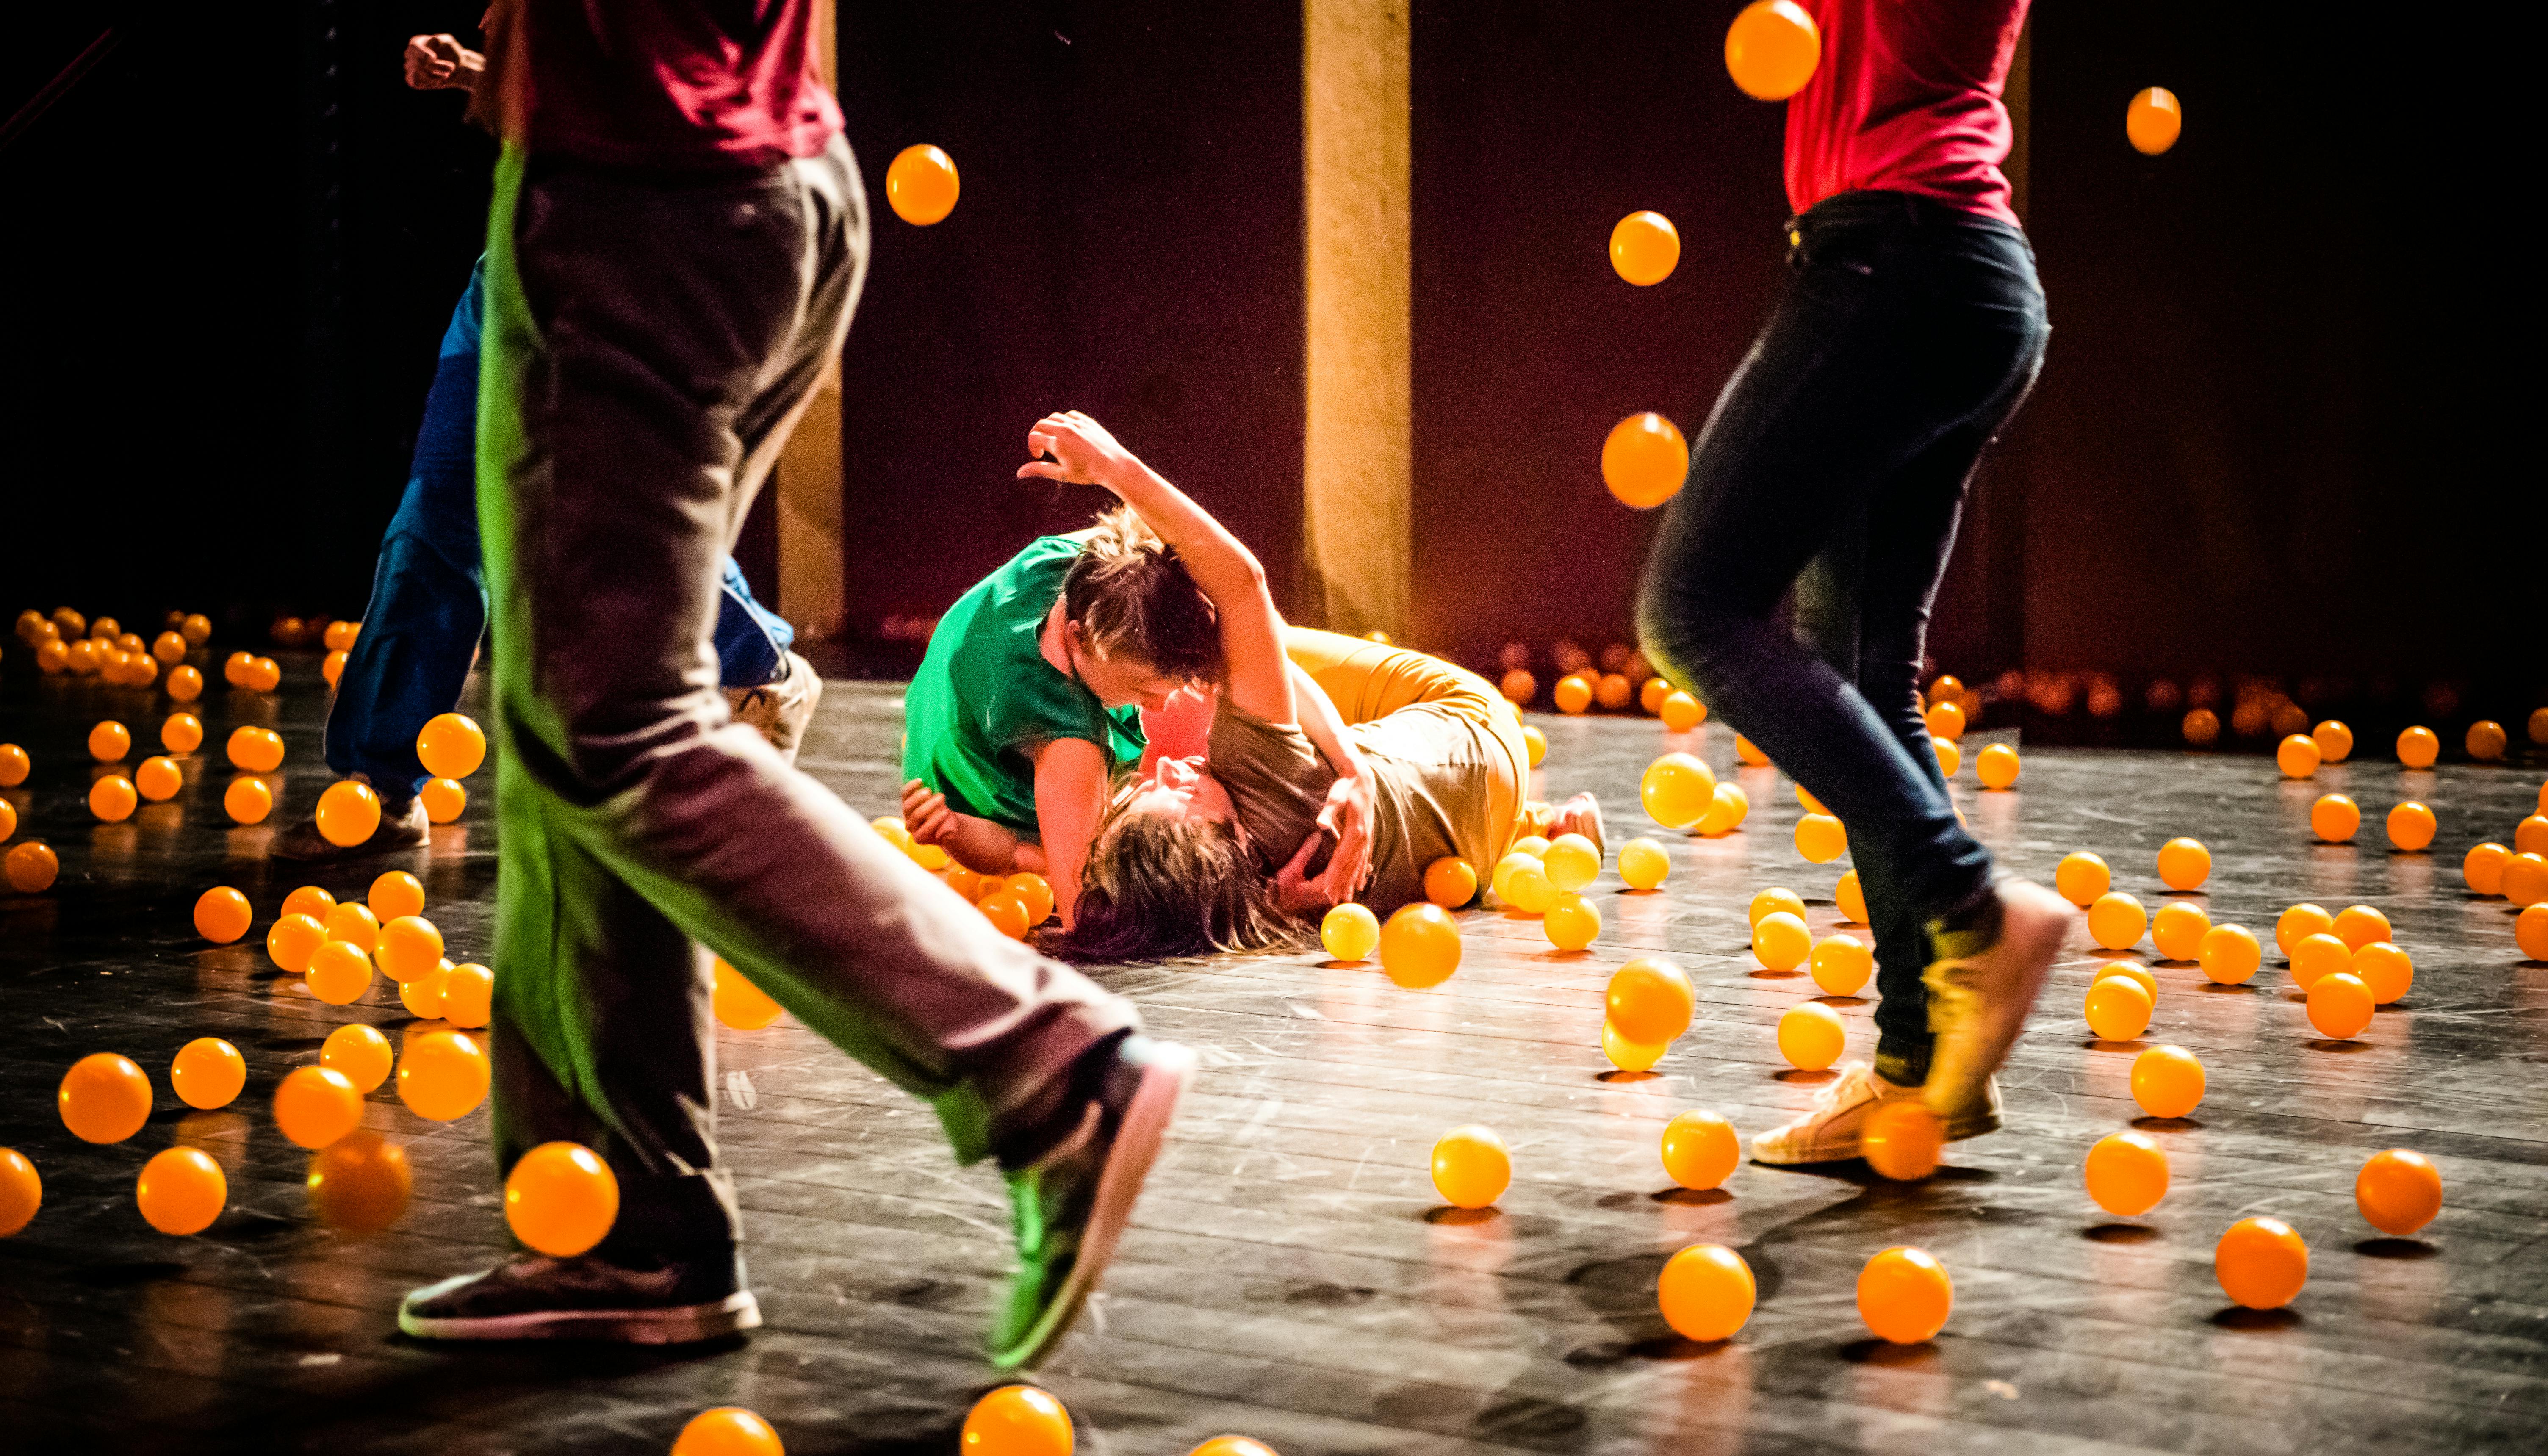 The artists perform on stage surrounded by orange balls